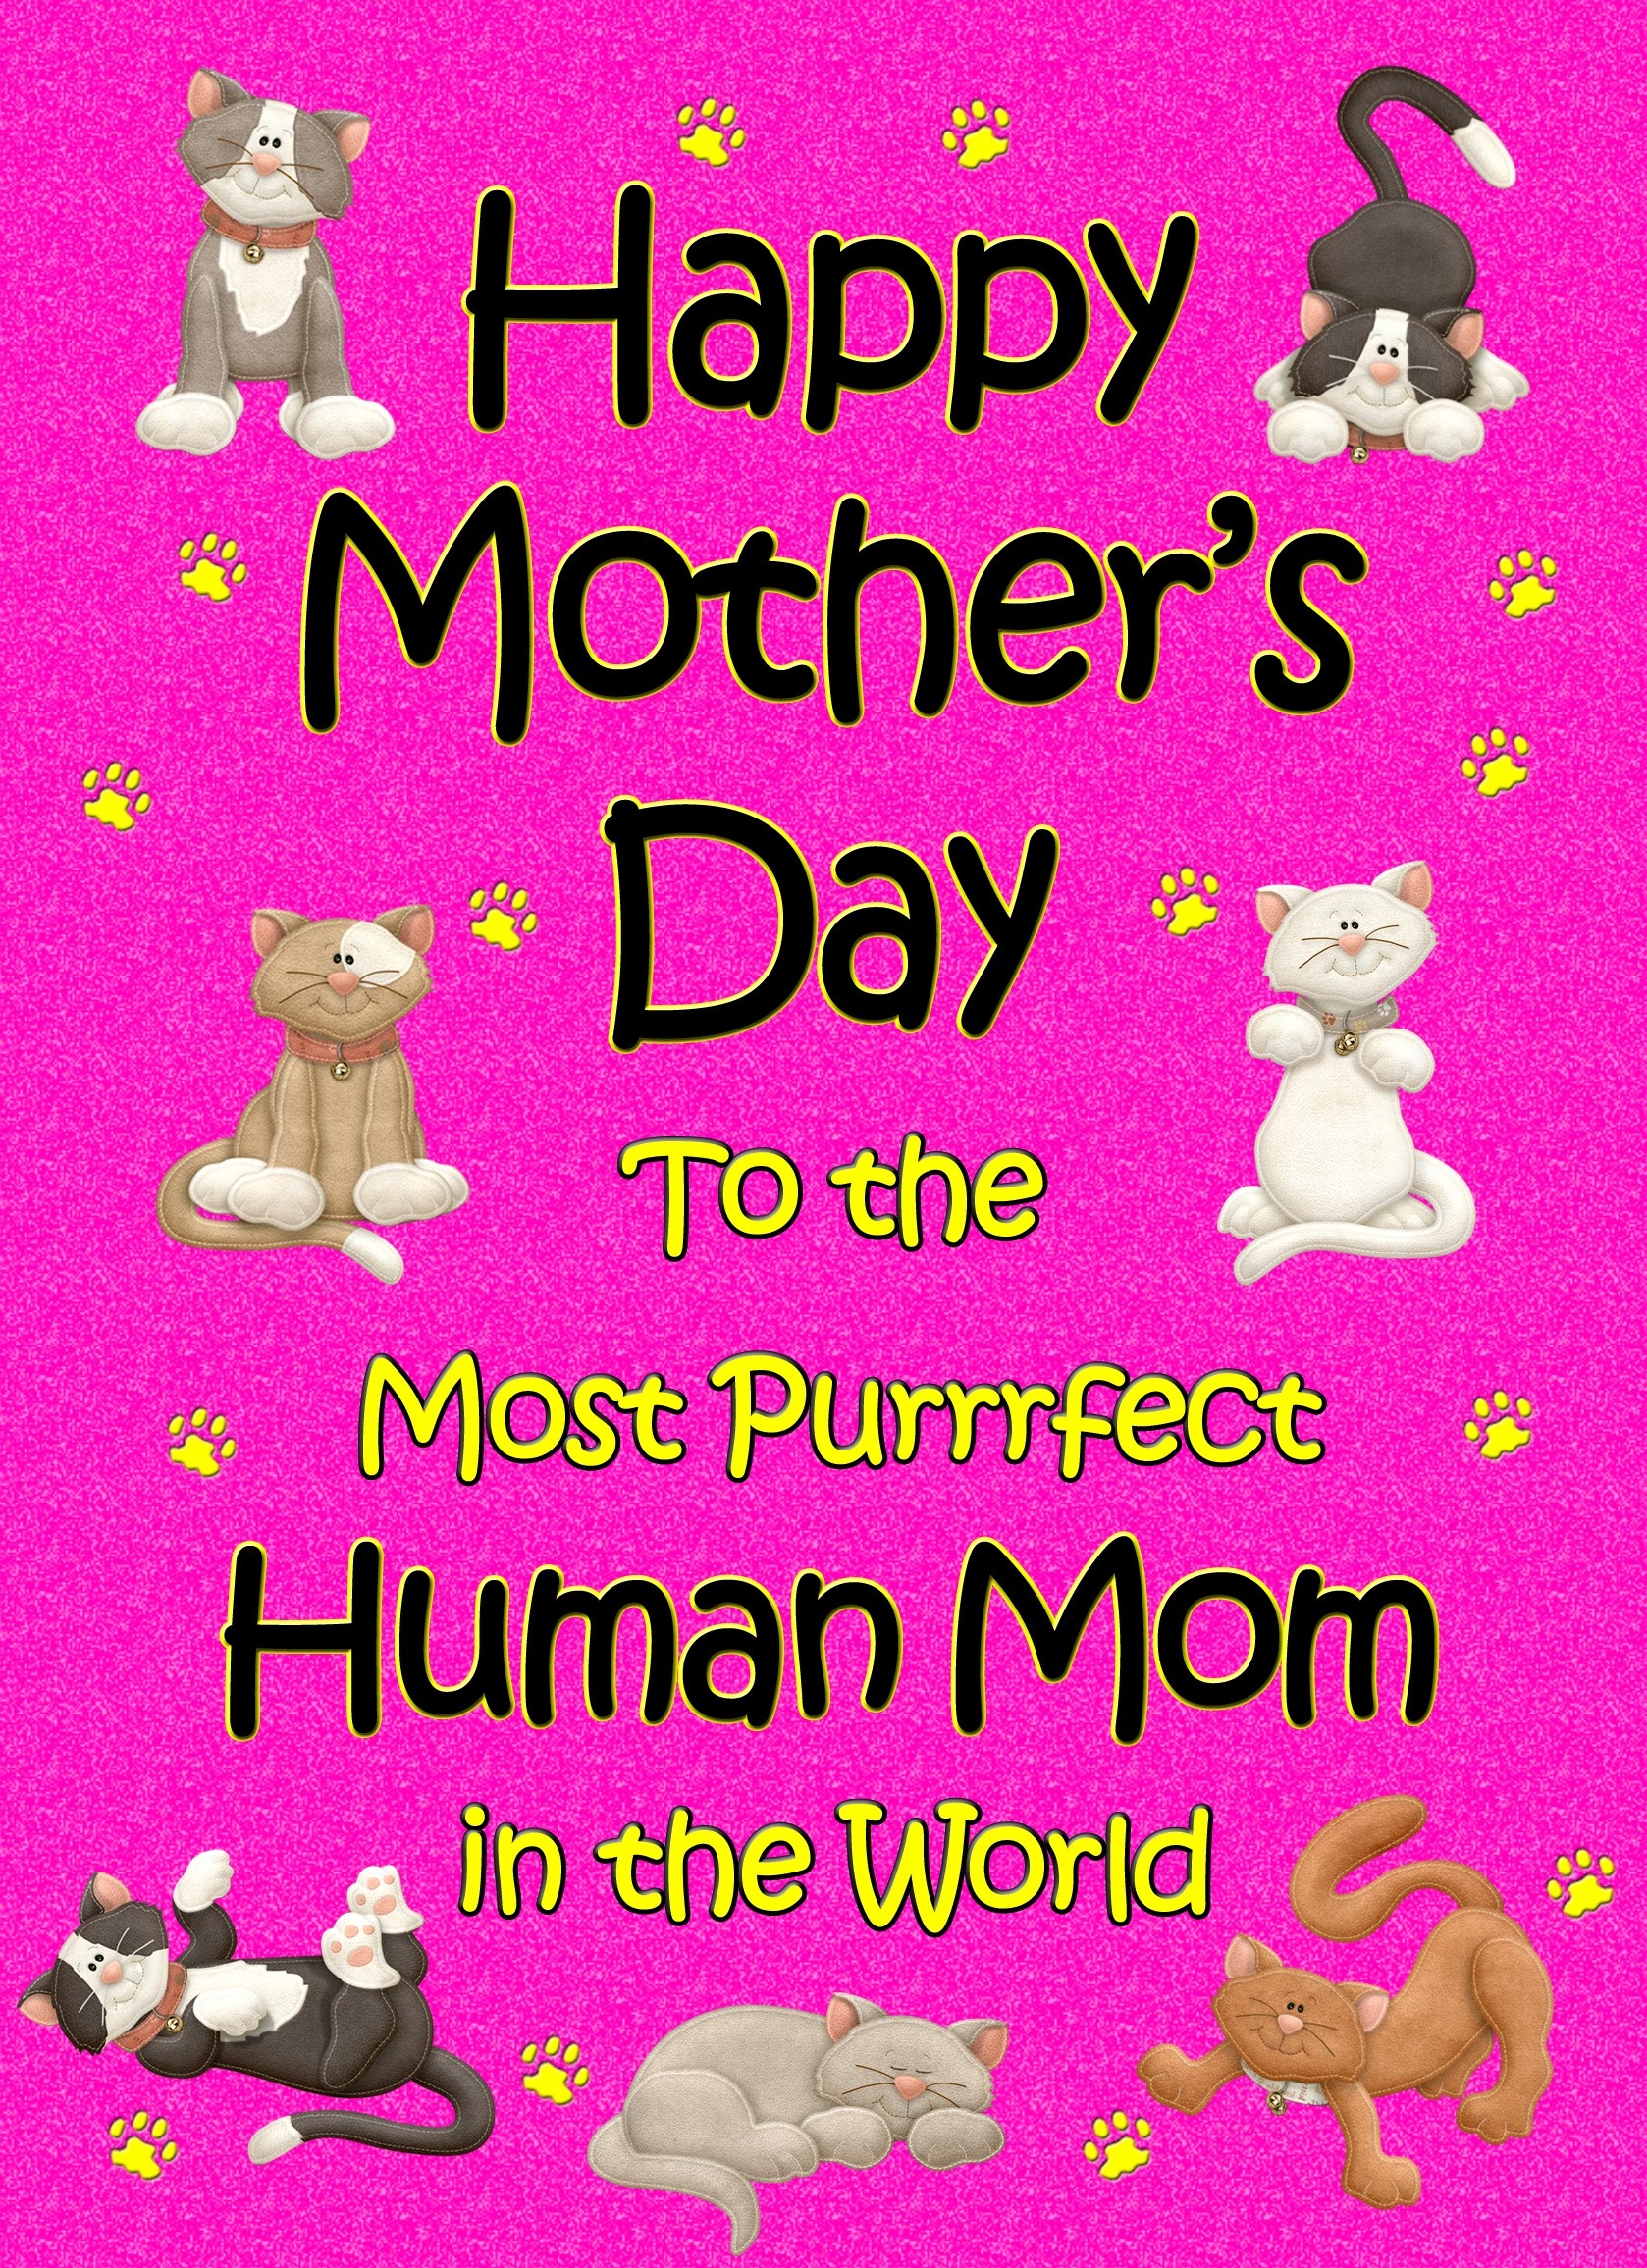 From The Cat Mothers Day Card (Cerise, Purrrfect Human Mom)